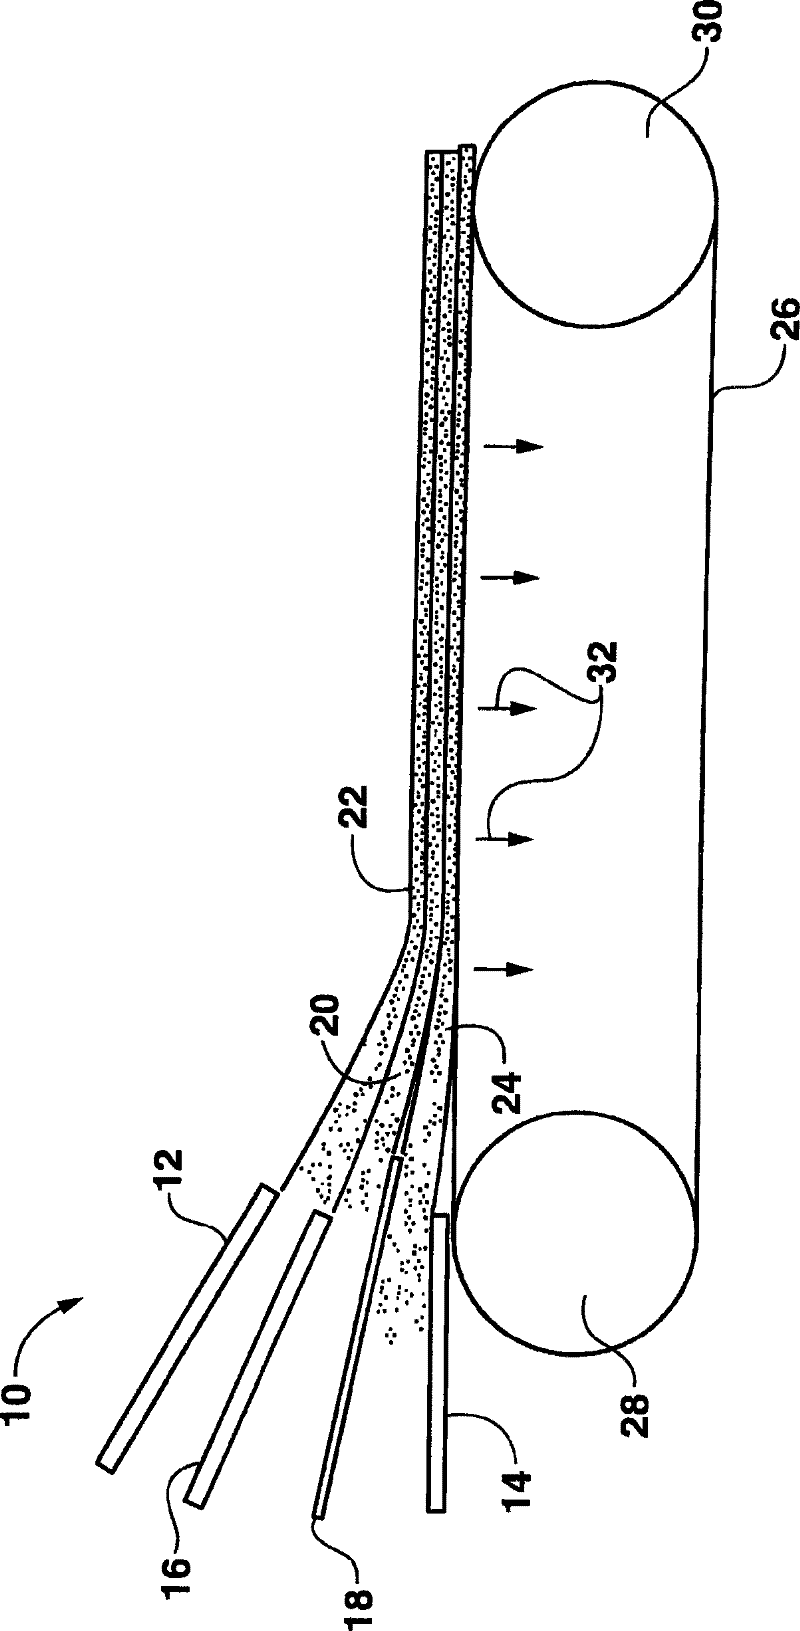 Process for producing tissue products